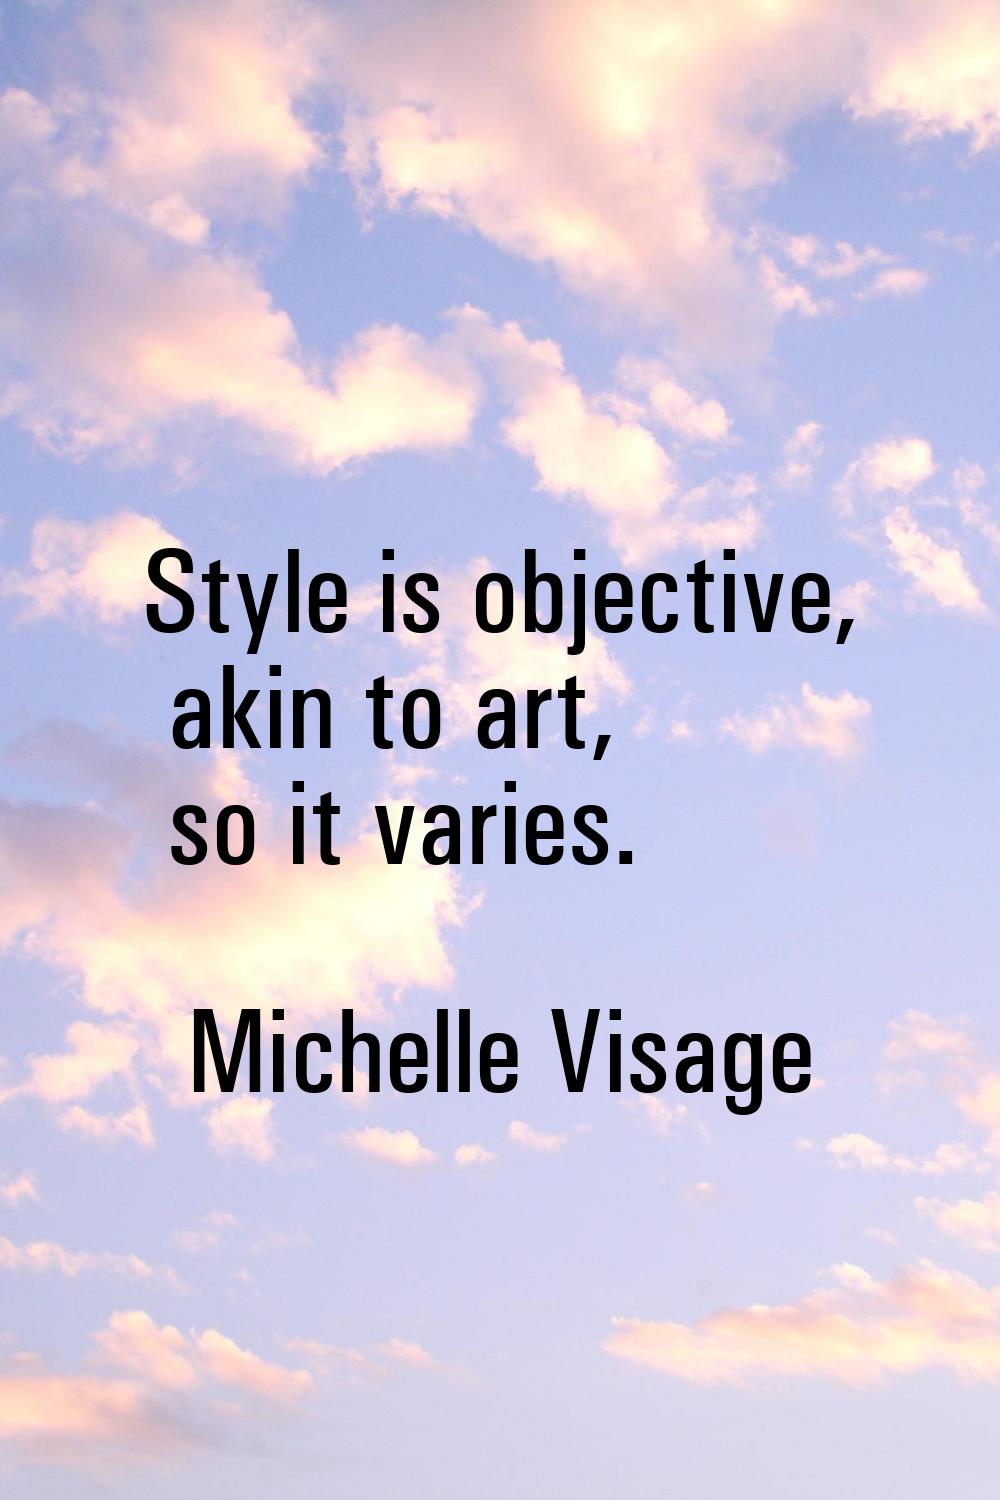 Style is objective, akin to art, so it varies.